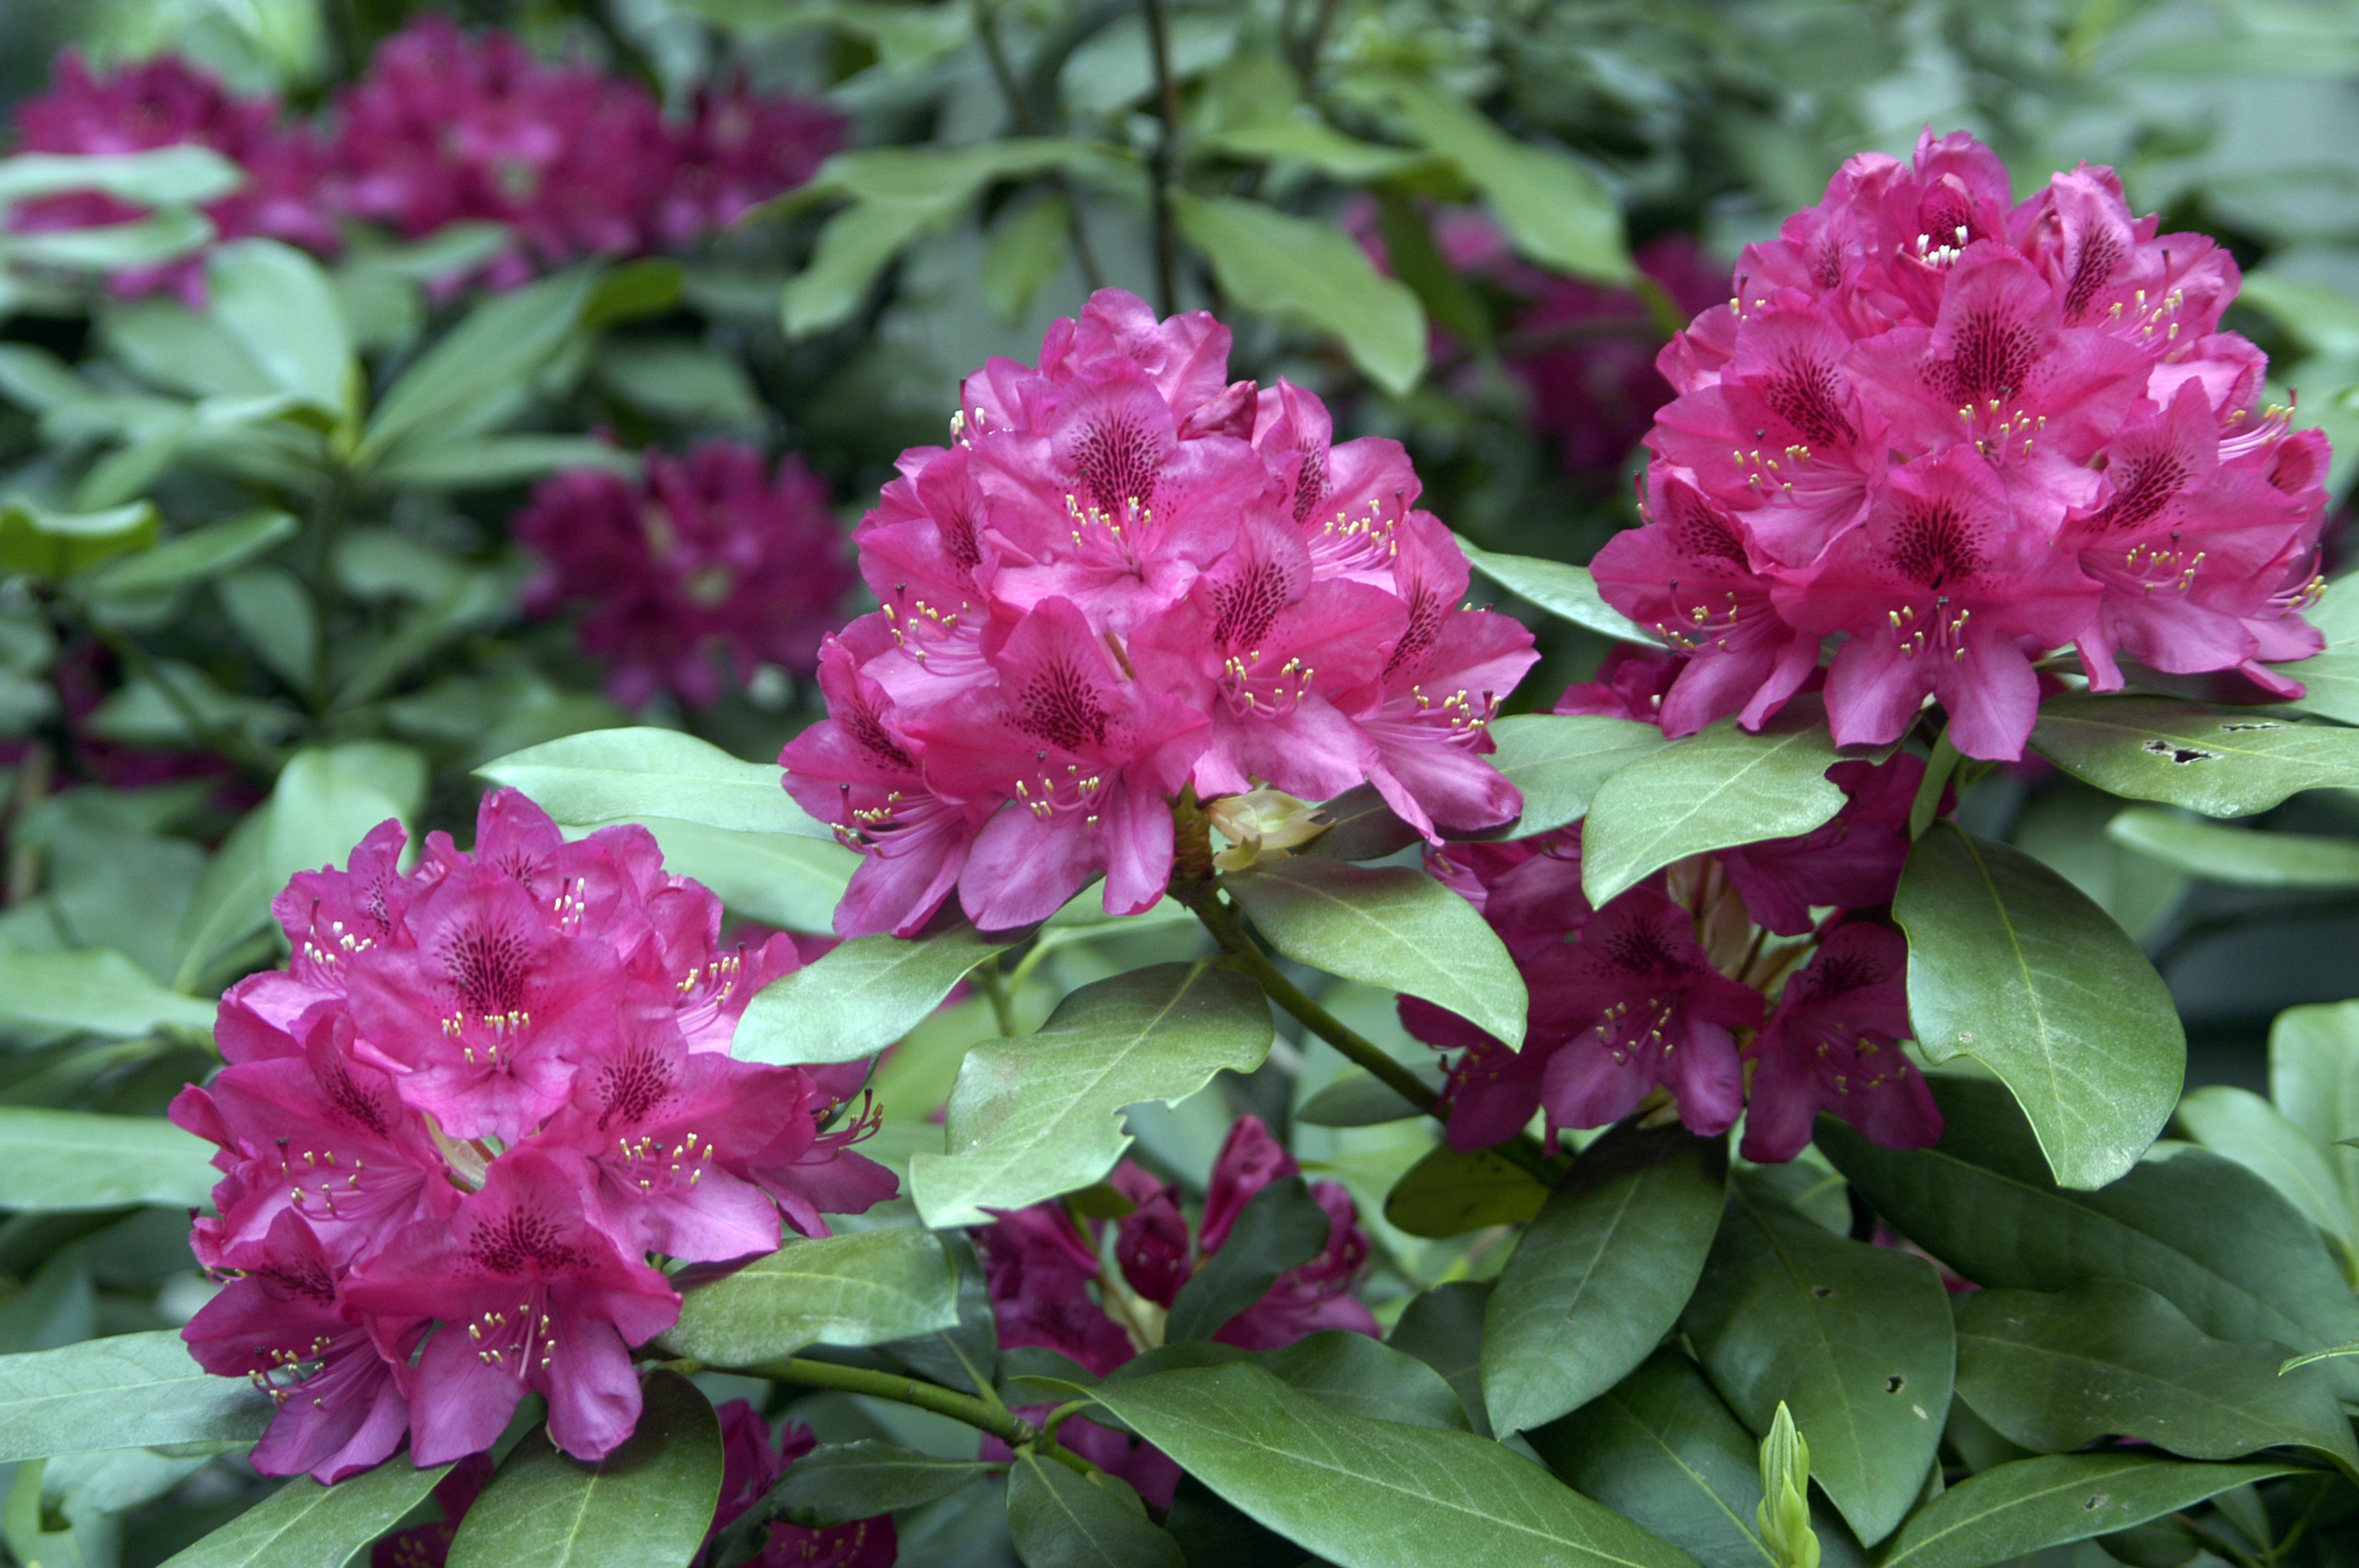 The Gardener's How-To: Pruning a Rhododendron - Cerny's Greenhouse